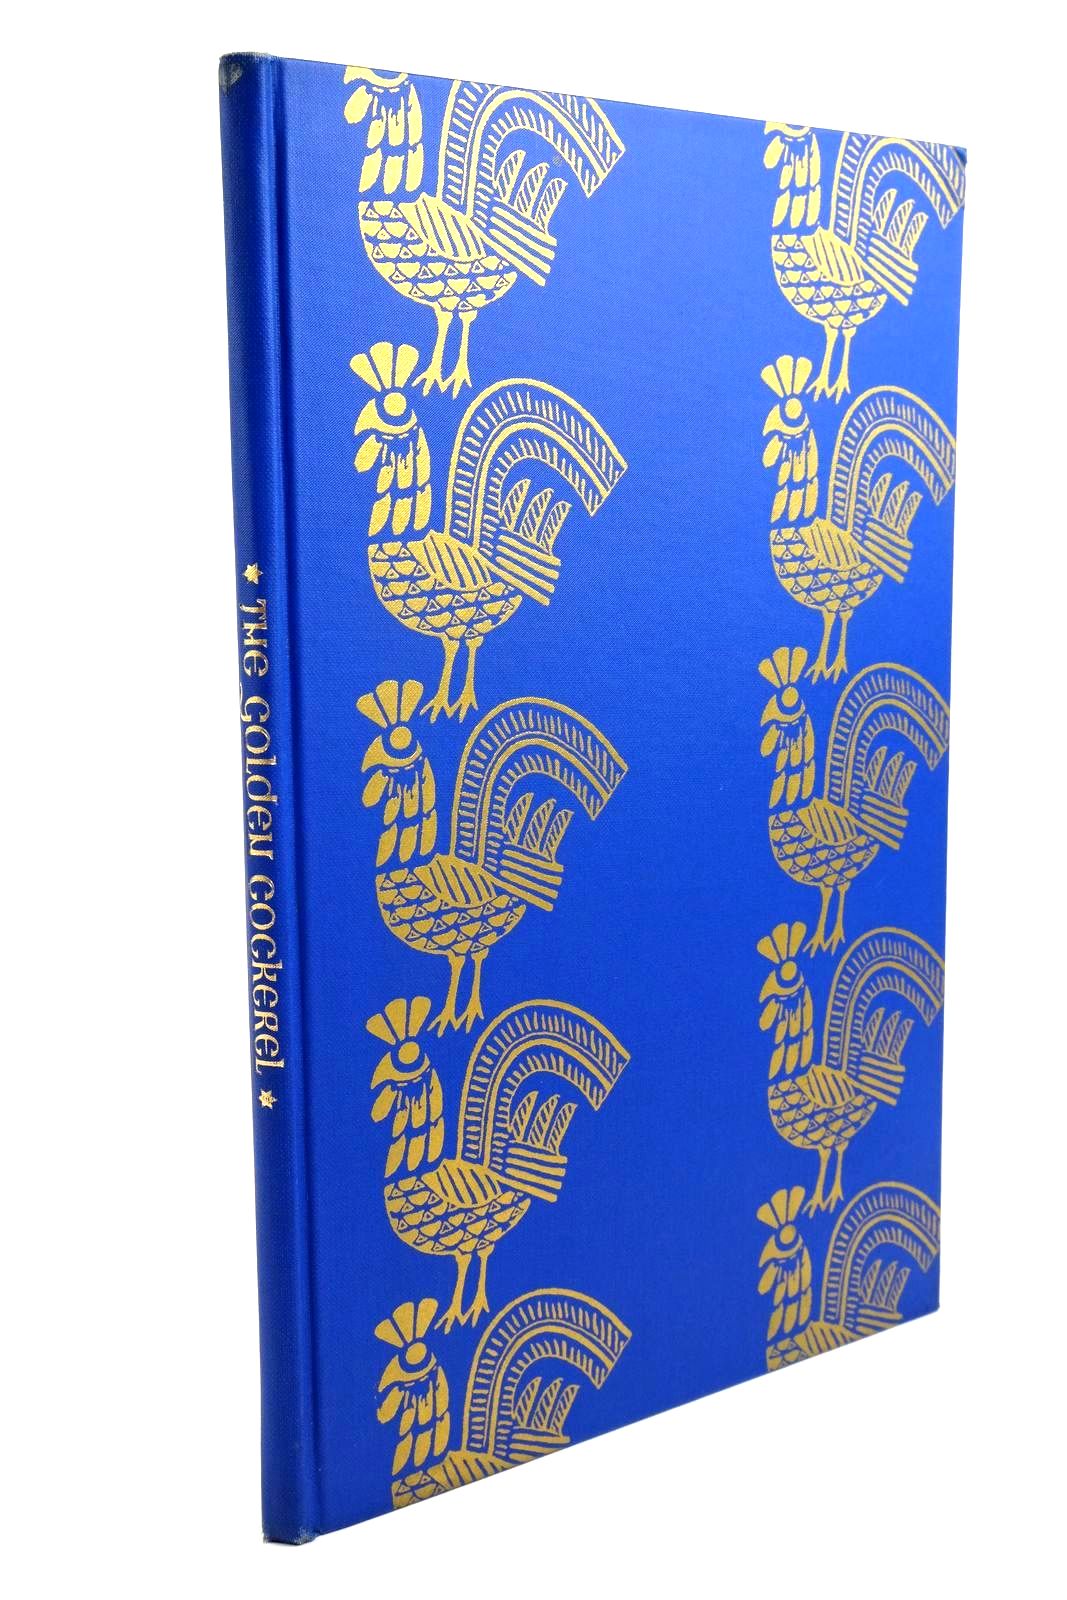 Photo of THE GOLDEN COCKEREL written by Pushkin, Alexander illustrated by Dulac, Edmund published by The Heritage Press (STOCK CODE: 1321737)  for sale by Stella & Rose's Books